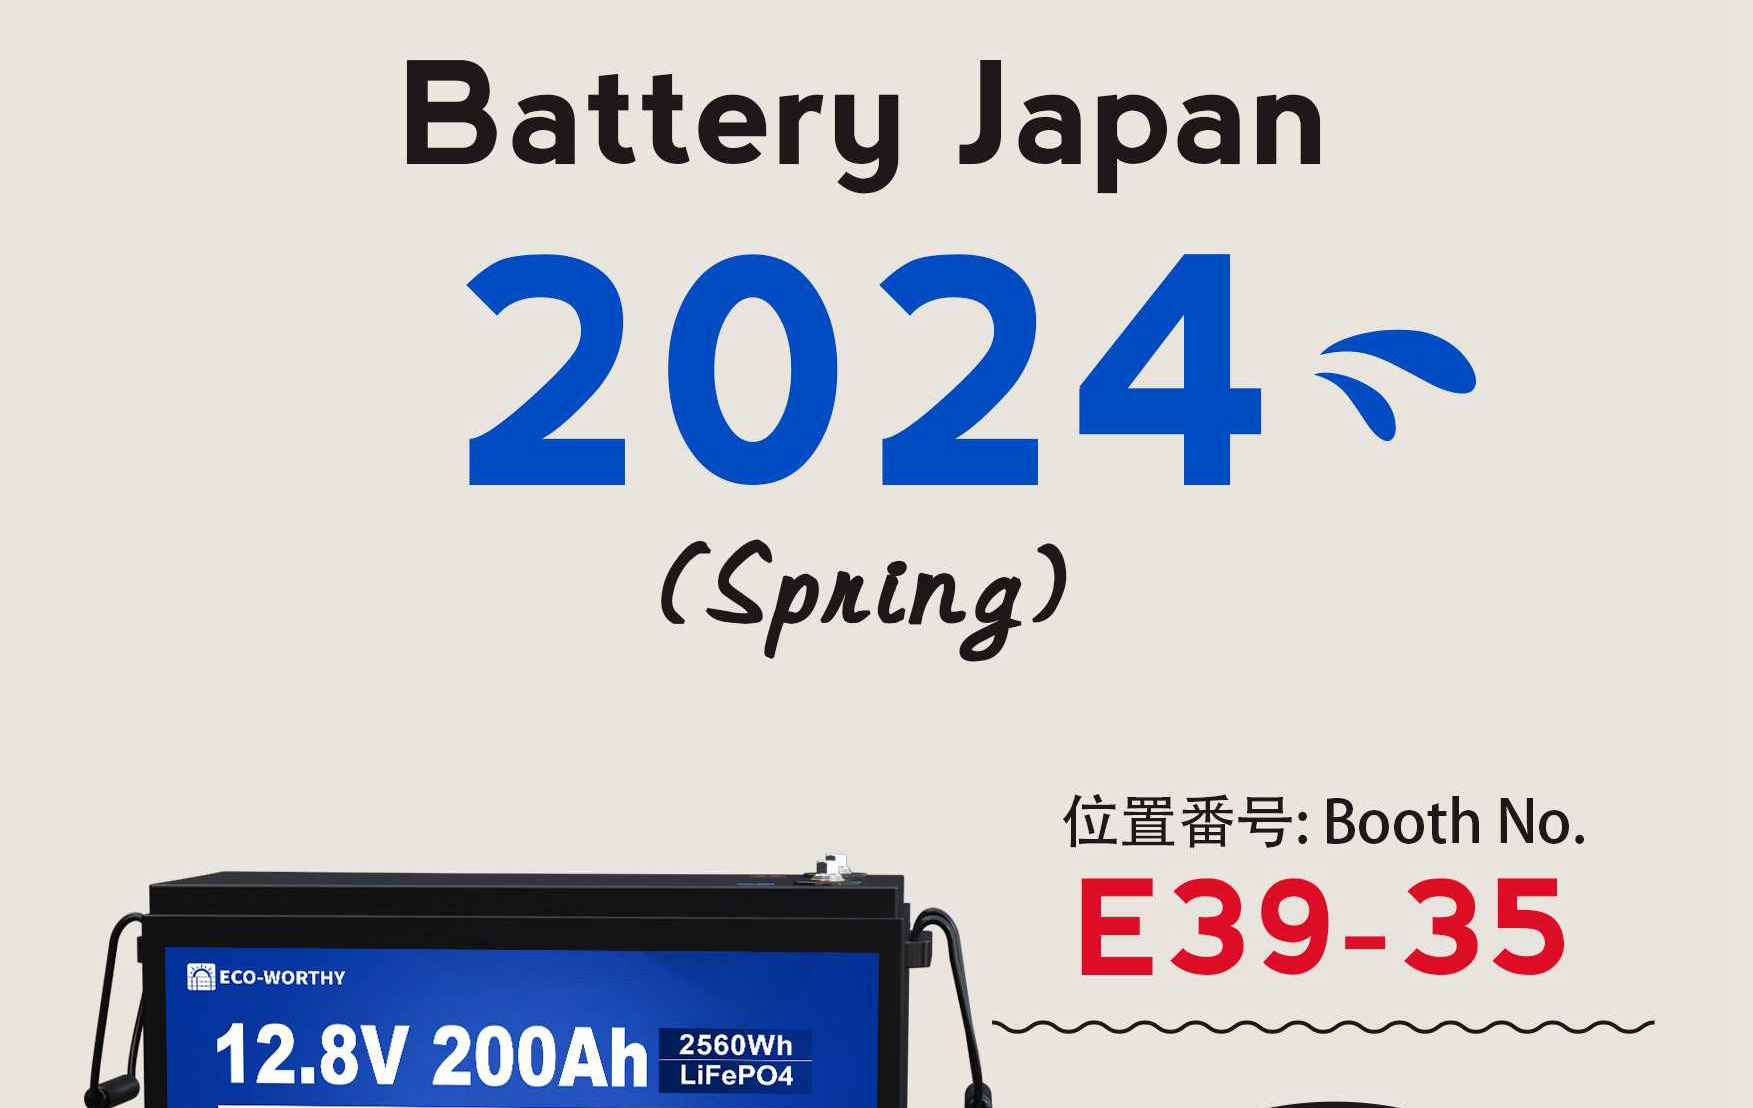 Battery Japan 2024 (Spring) Exhibition